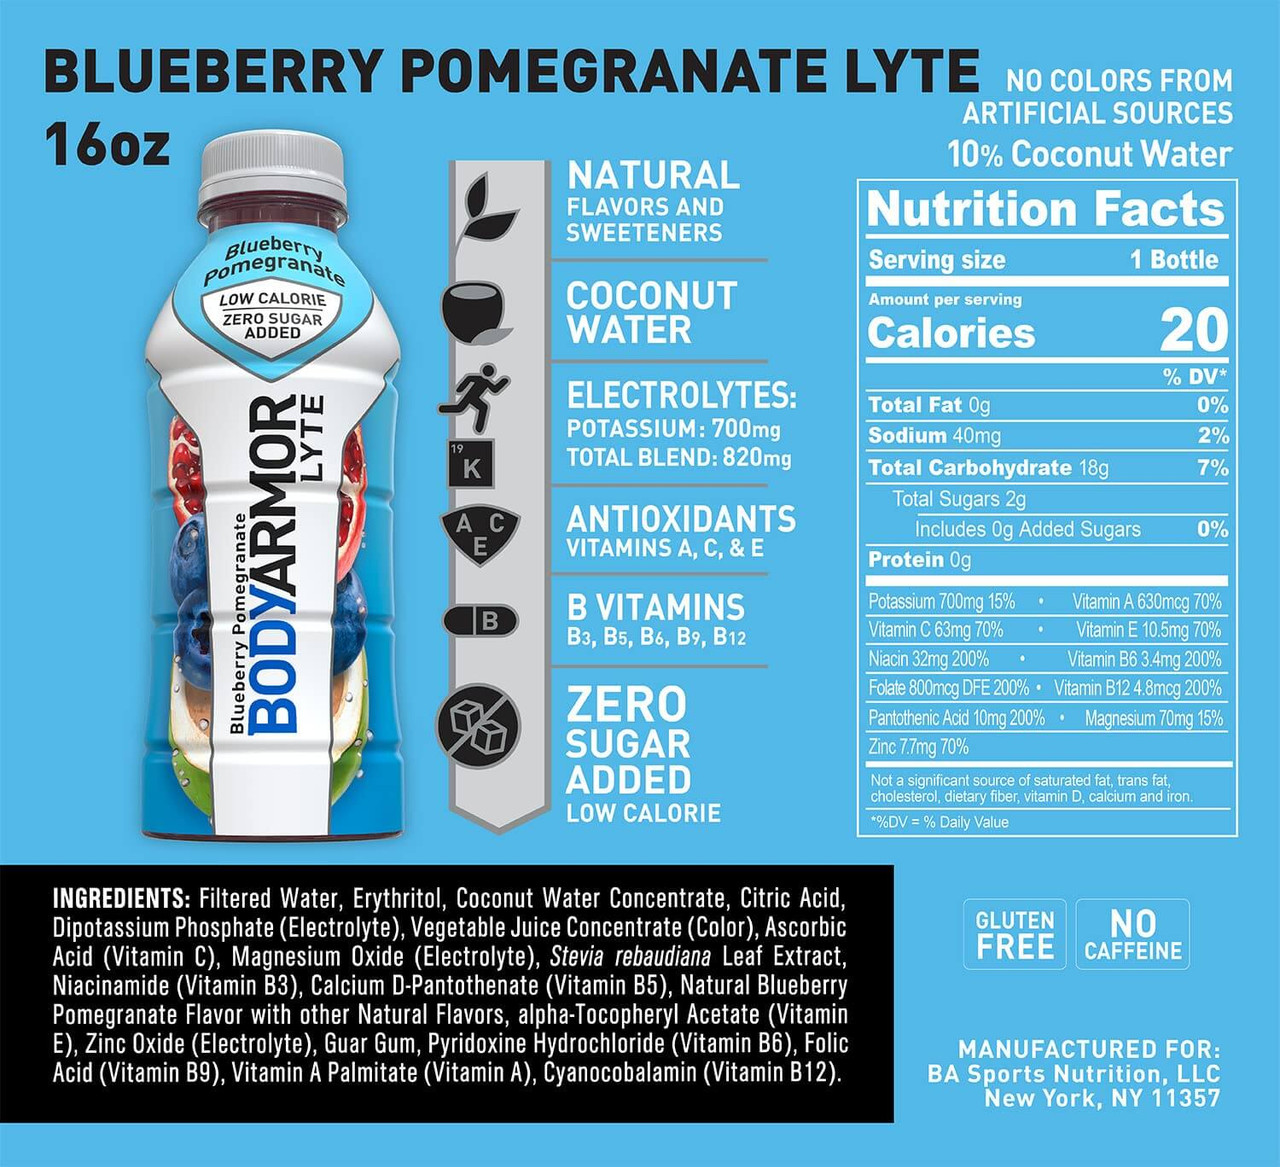 BODYARMOR Sports SuperDrink Coconut Water Hydration Blueberry Pomegranate Lyte 473ml Low Calorie-12 PACK